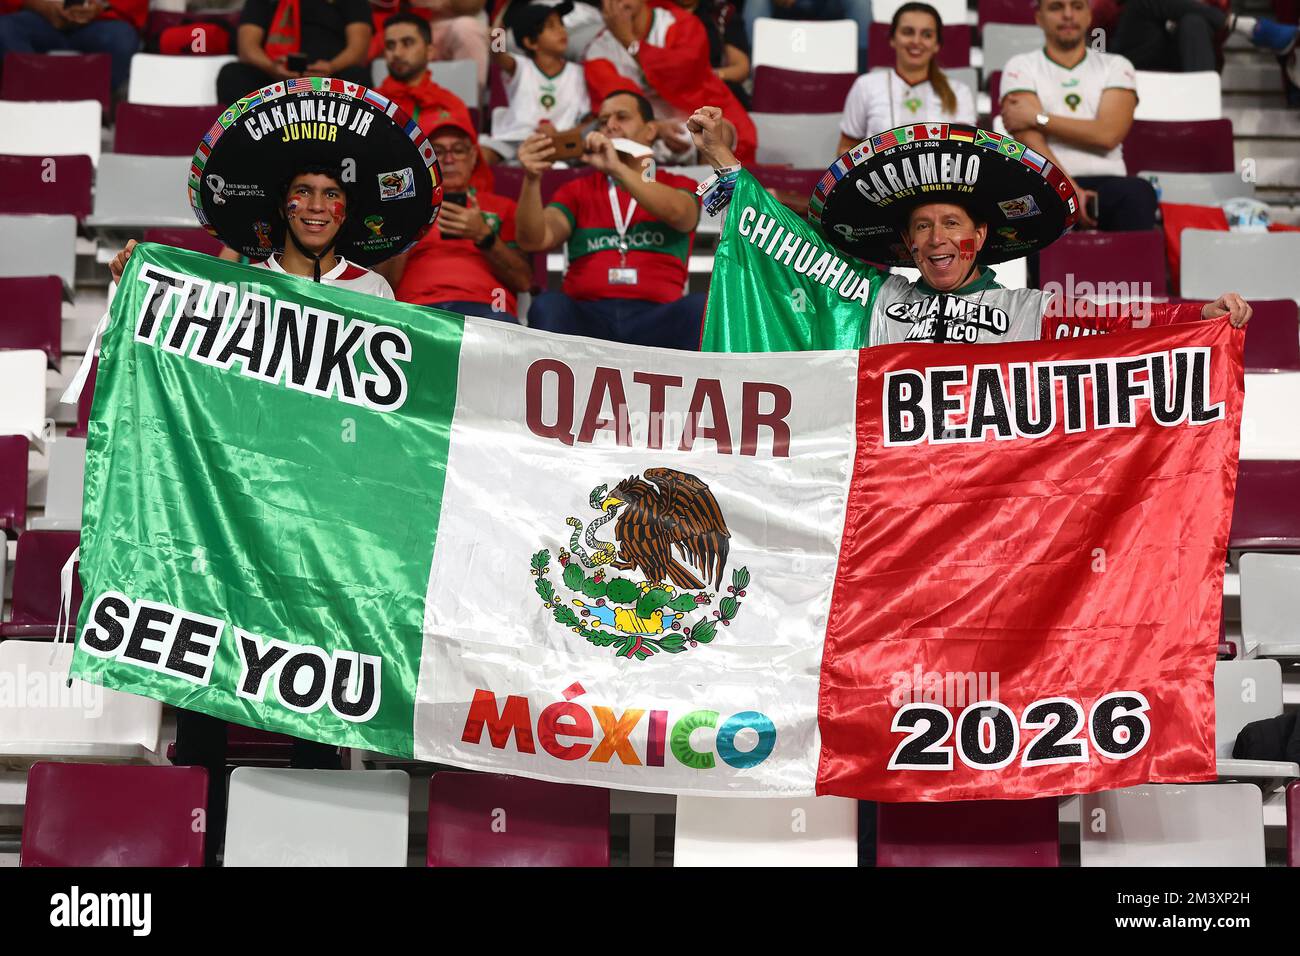 Doha, Qatar. 17th Dec, 2022. Football fans display a banner looking forward to World Cup 2026 during the 2022 FIFA World Cup third place match at Khalifa International Stadium in Doha, Qatar on December 17, 2022. Photo by Chris Brunskill/UPI Credit: UPI/Alamy Live News Stock Photo